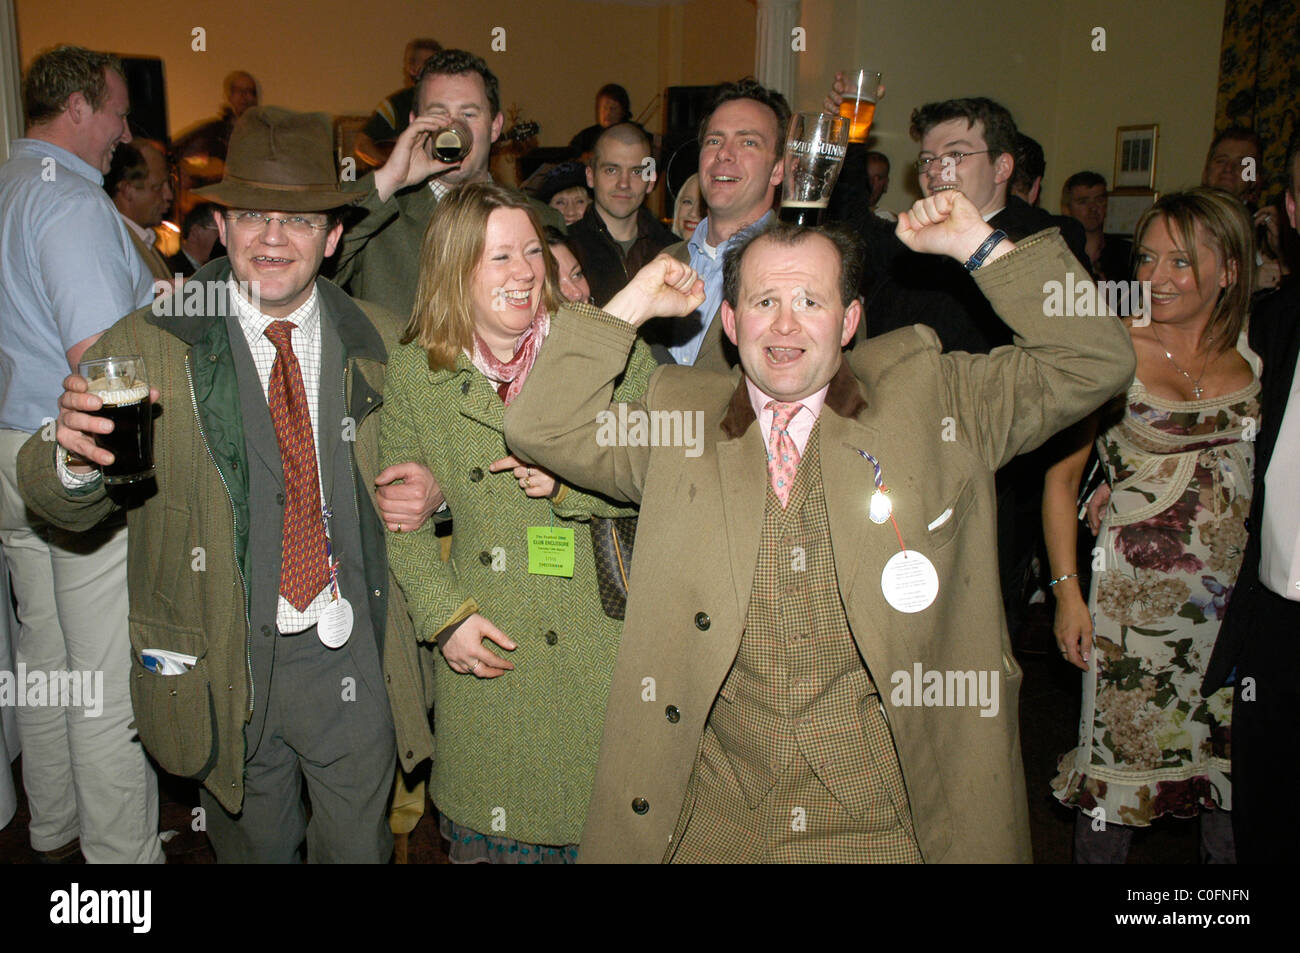 Drinkers enjoying themselves after a day at Cheltenham Horse racing at The Queen Hotel. Stock Photo